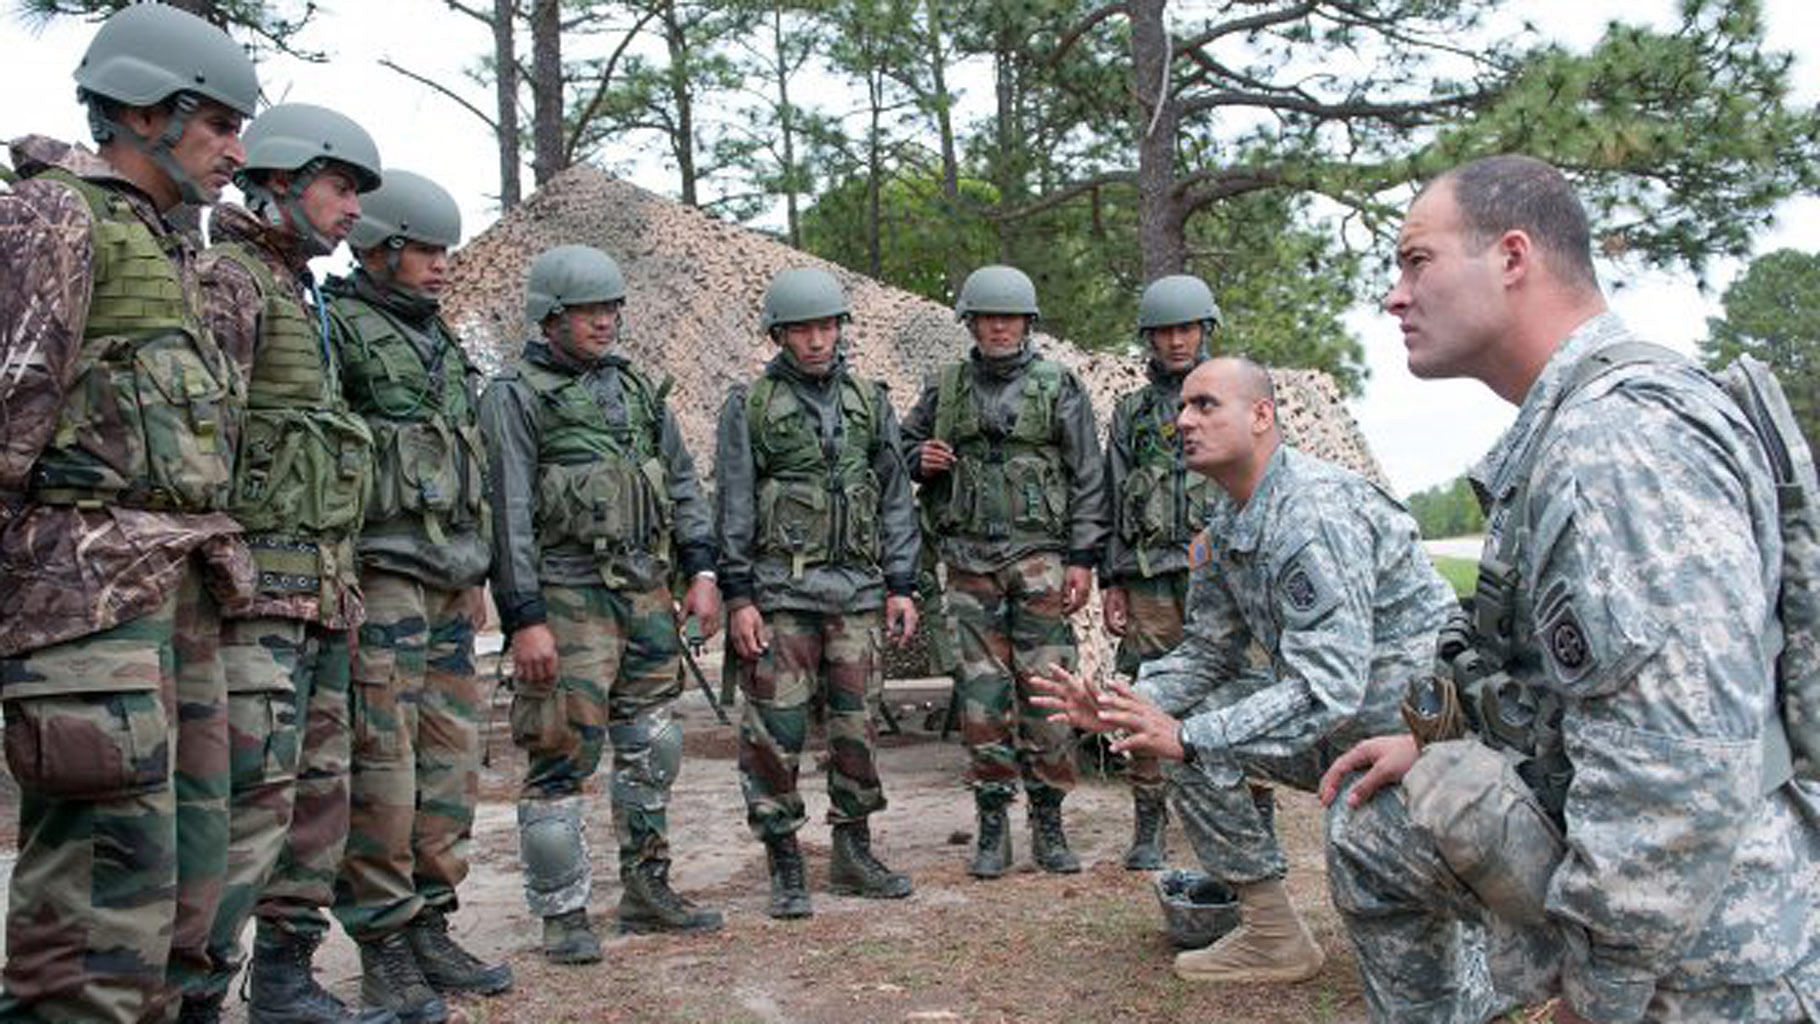 US Army paratrooper explains weapon range safety procedures to Indian Army troops. (Photo Courtesy: US army <a href="http://www.army.mil/article/103127/Yudh_Abhyas_2013_Begins/">official website</a>)